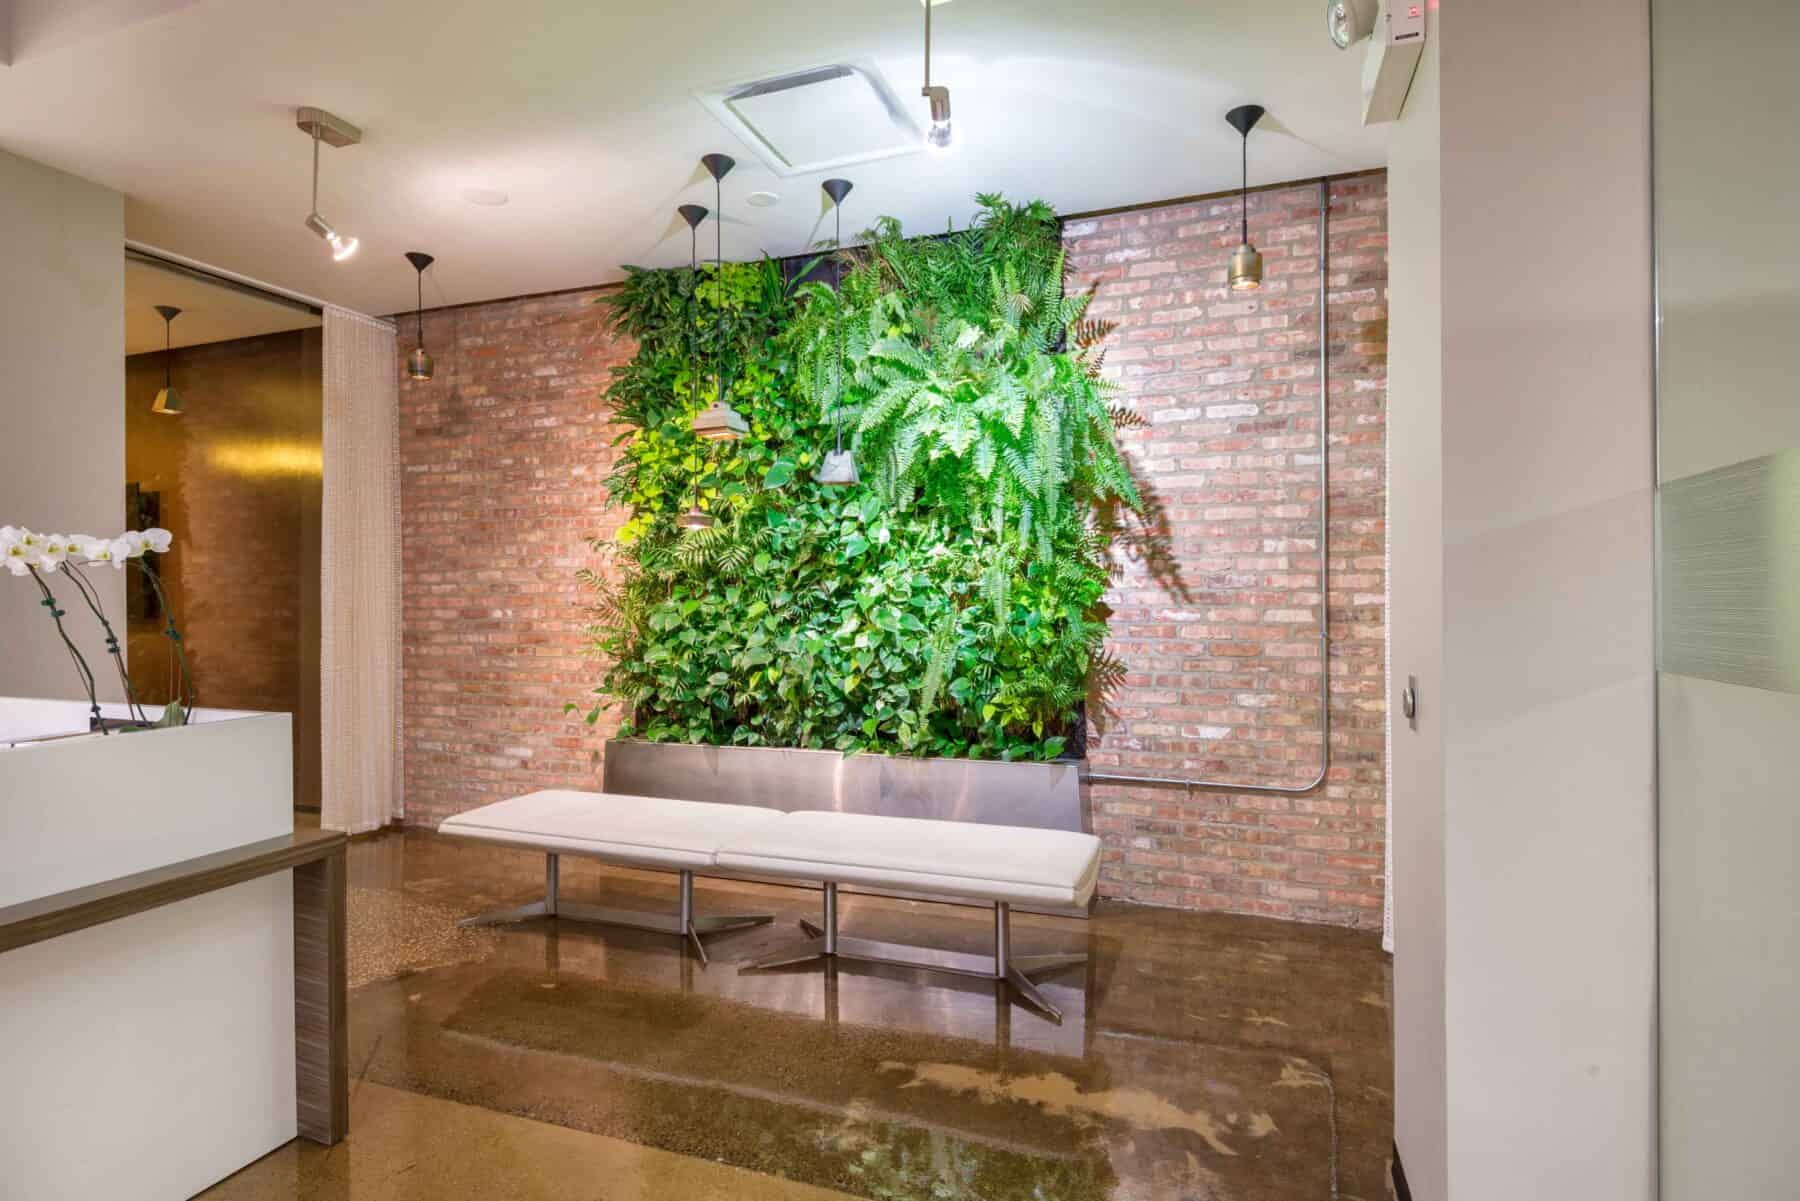 Office Remodel with Exposed Brick and Plant Wall by Commercial Builder & General Contractor Structural Enterprises